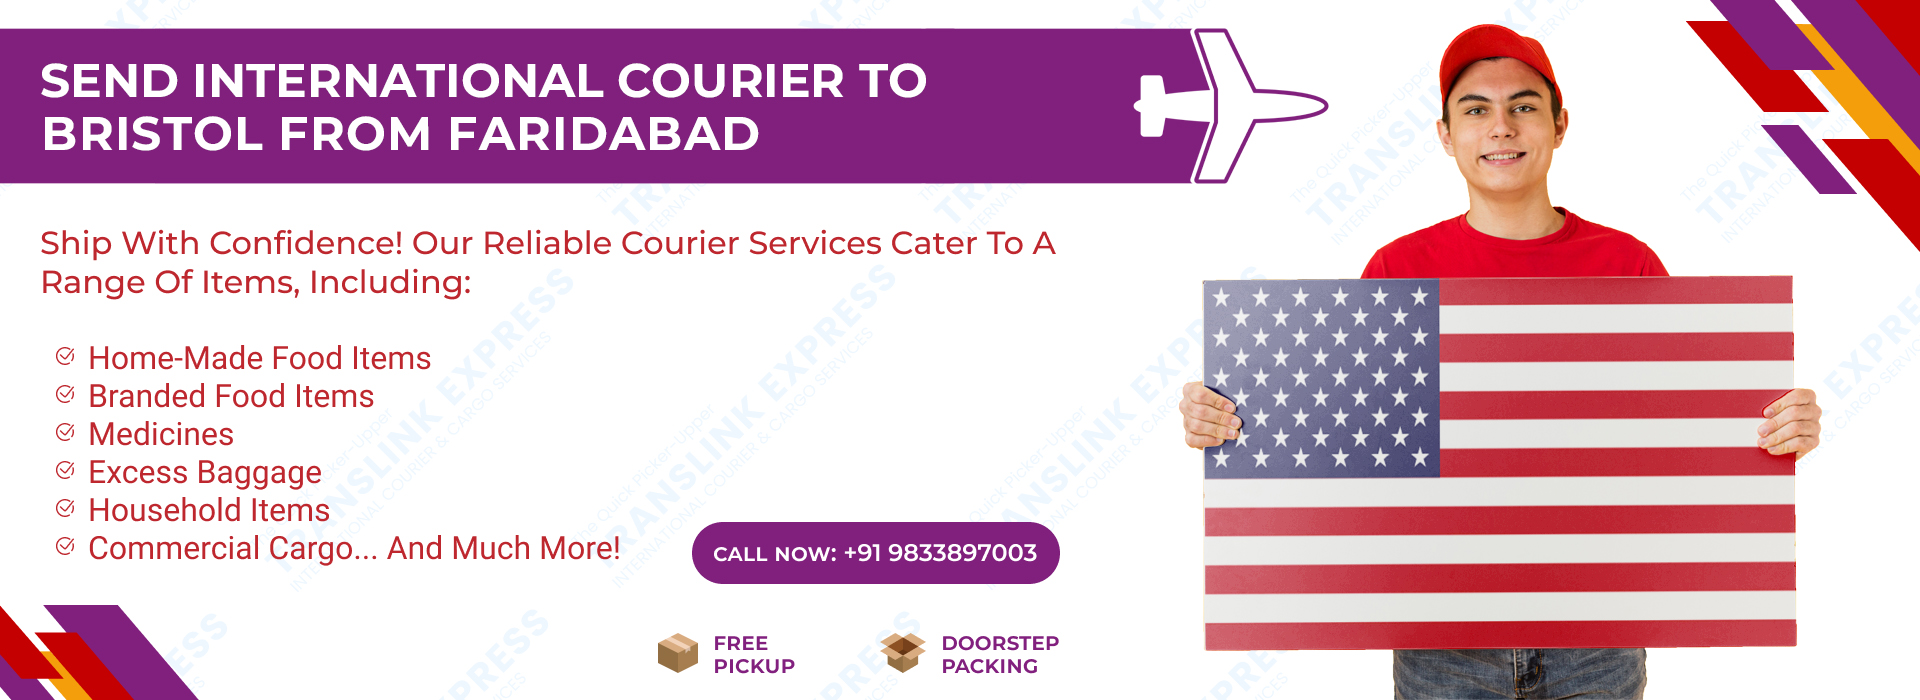 Courier to Bristol From Faridabad